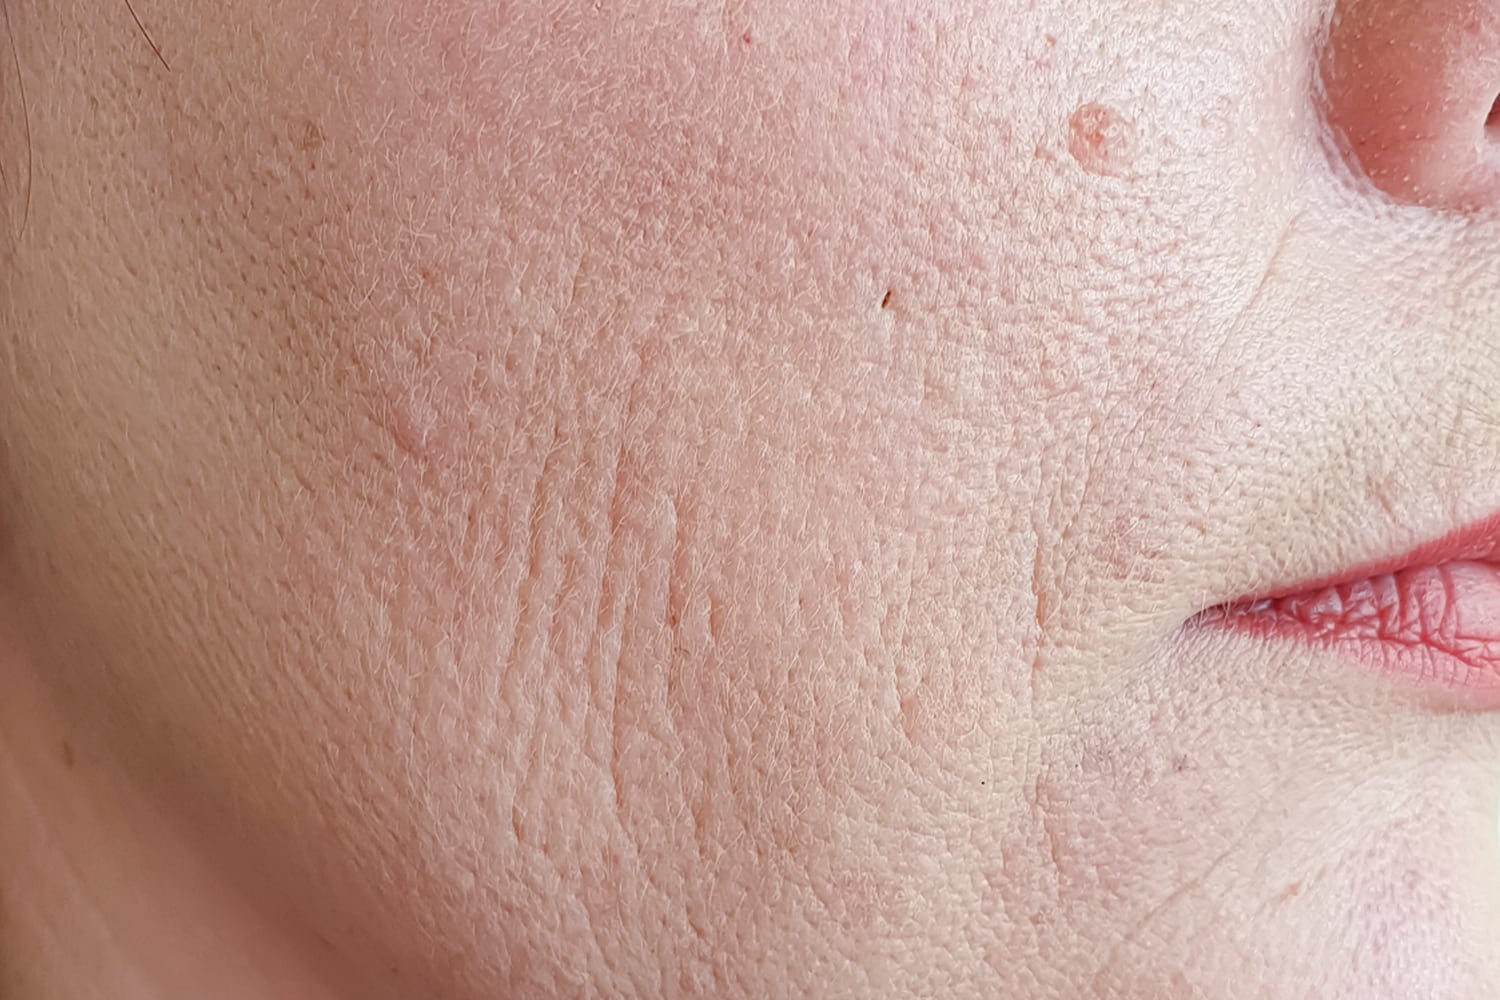 Close up of a woman's cheek with open pores prior to Juvederm treatment at Regeneris Medspa